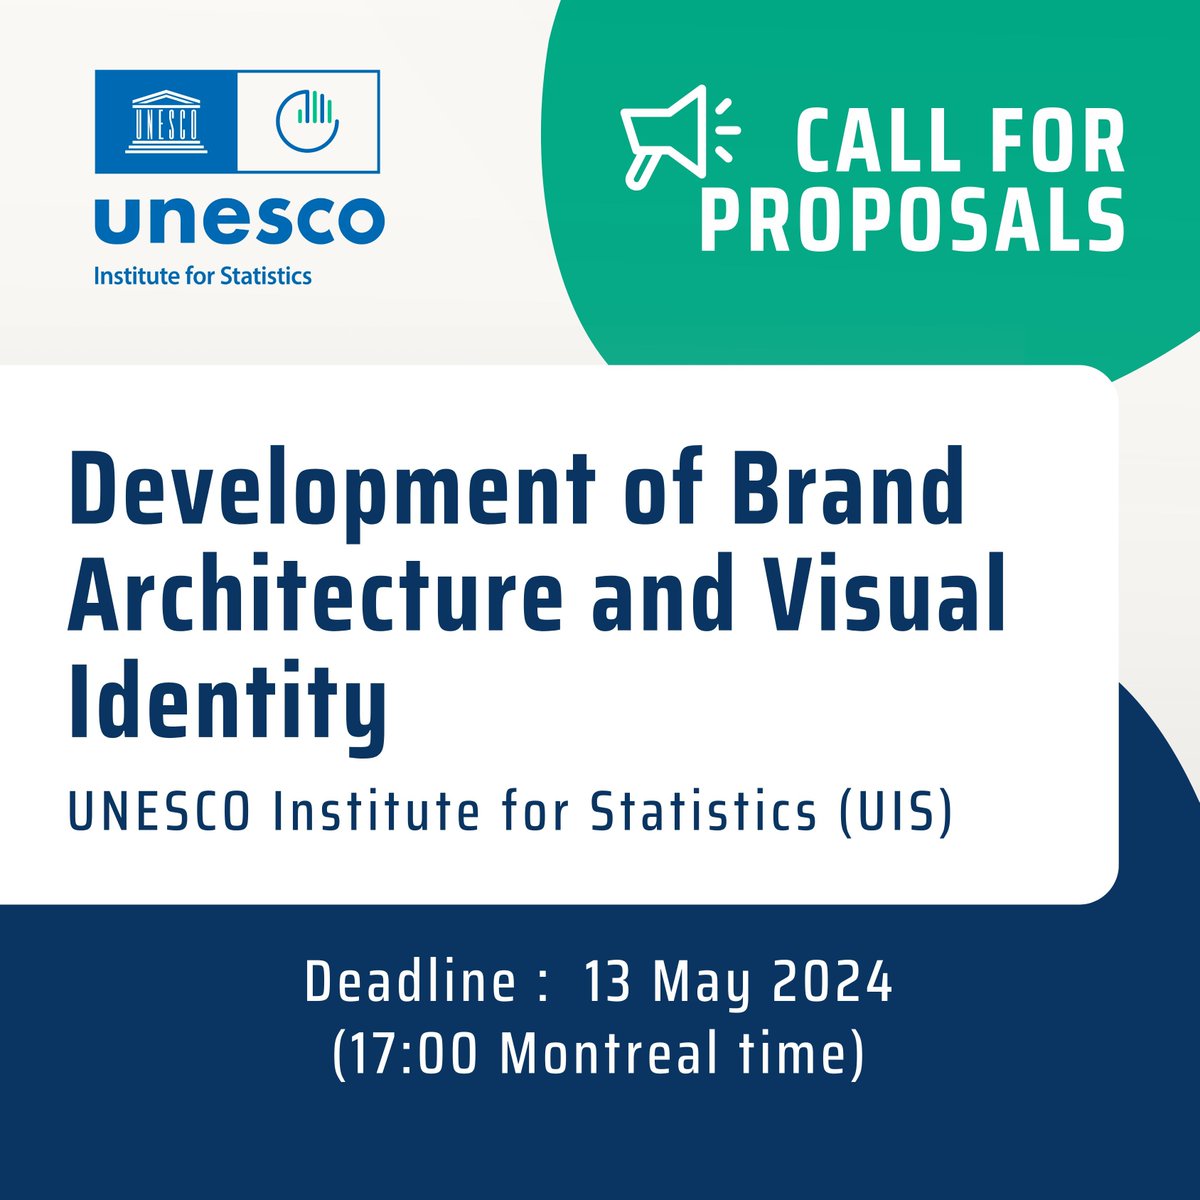 📢 Call for Proposals! #UIS_UNESCO @UNESCOstat is seeking proposals from companies to develop a comprehensive Brand Architecture and Visual Identity for the UNESCO Institute for Statistics (UIS) Details ➡️ ungm.org/Public/Notice/…